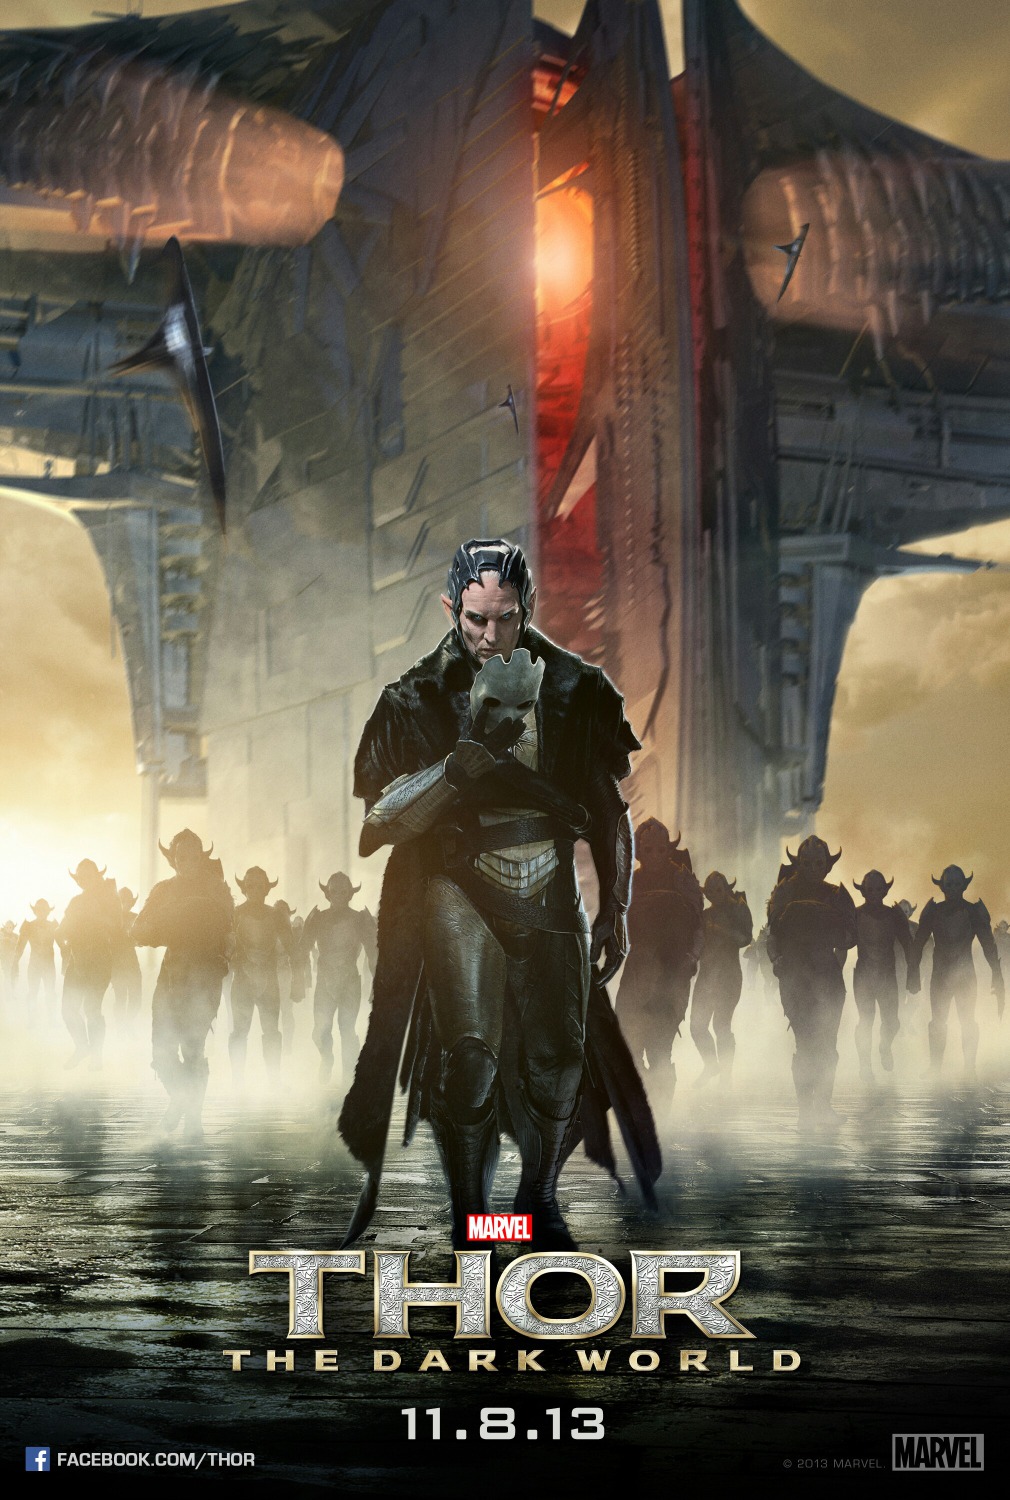 Extra Large Movie Poster Image for Thor: The Dark World (#14 of 19)